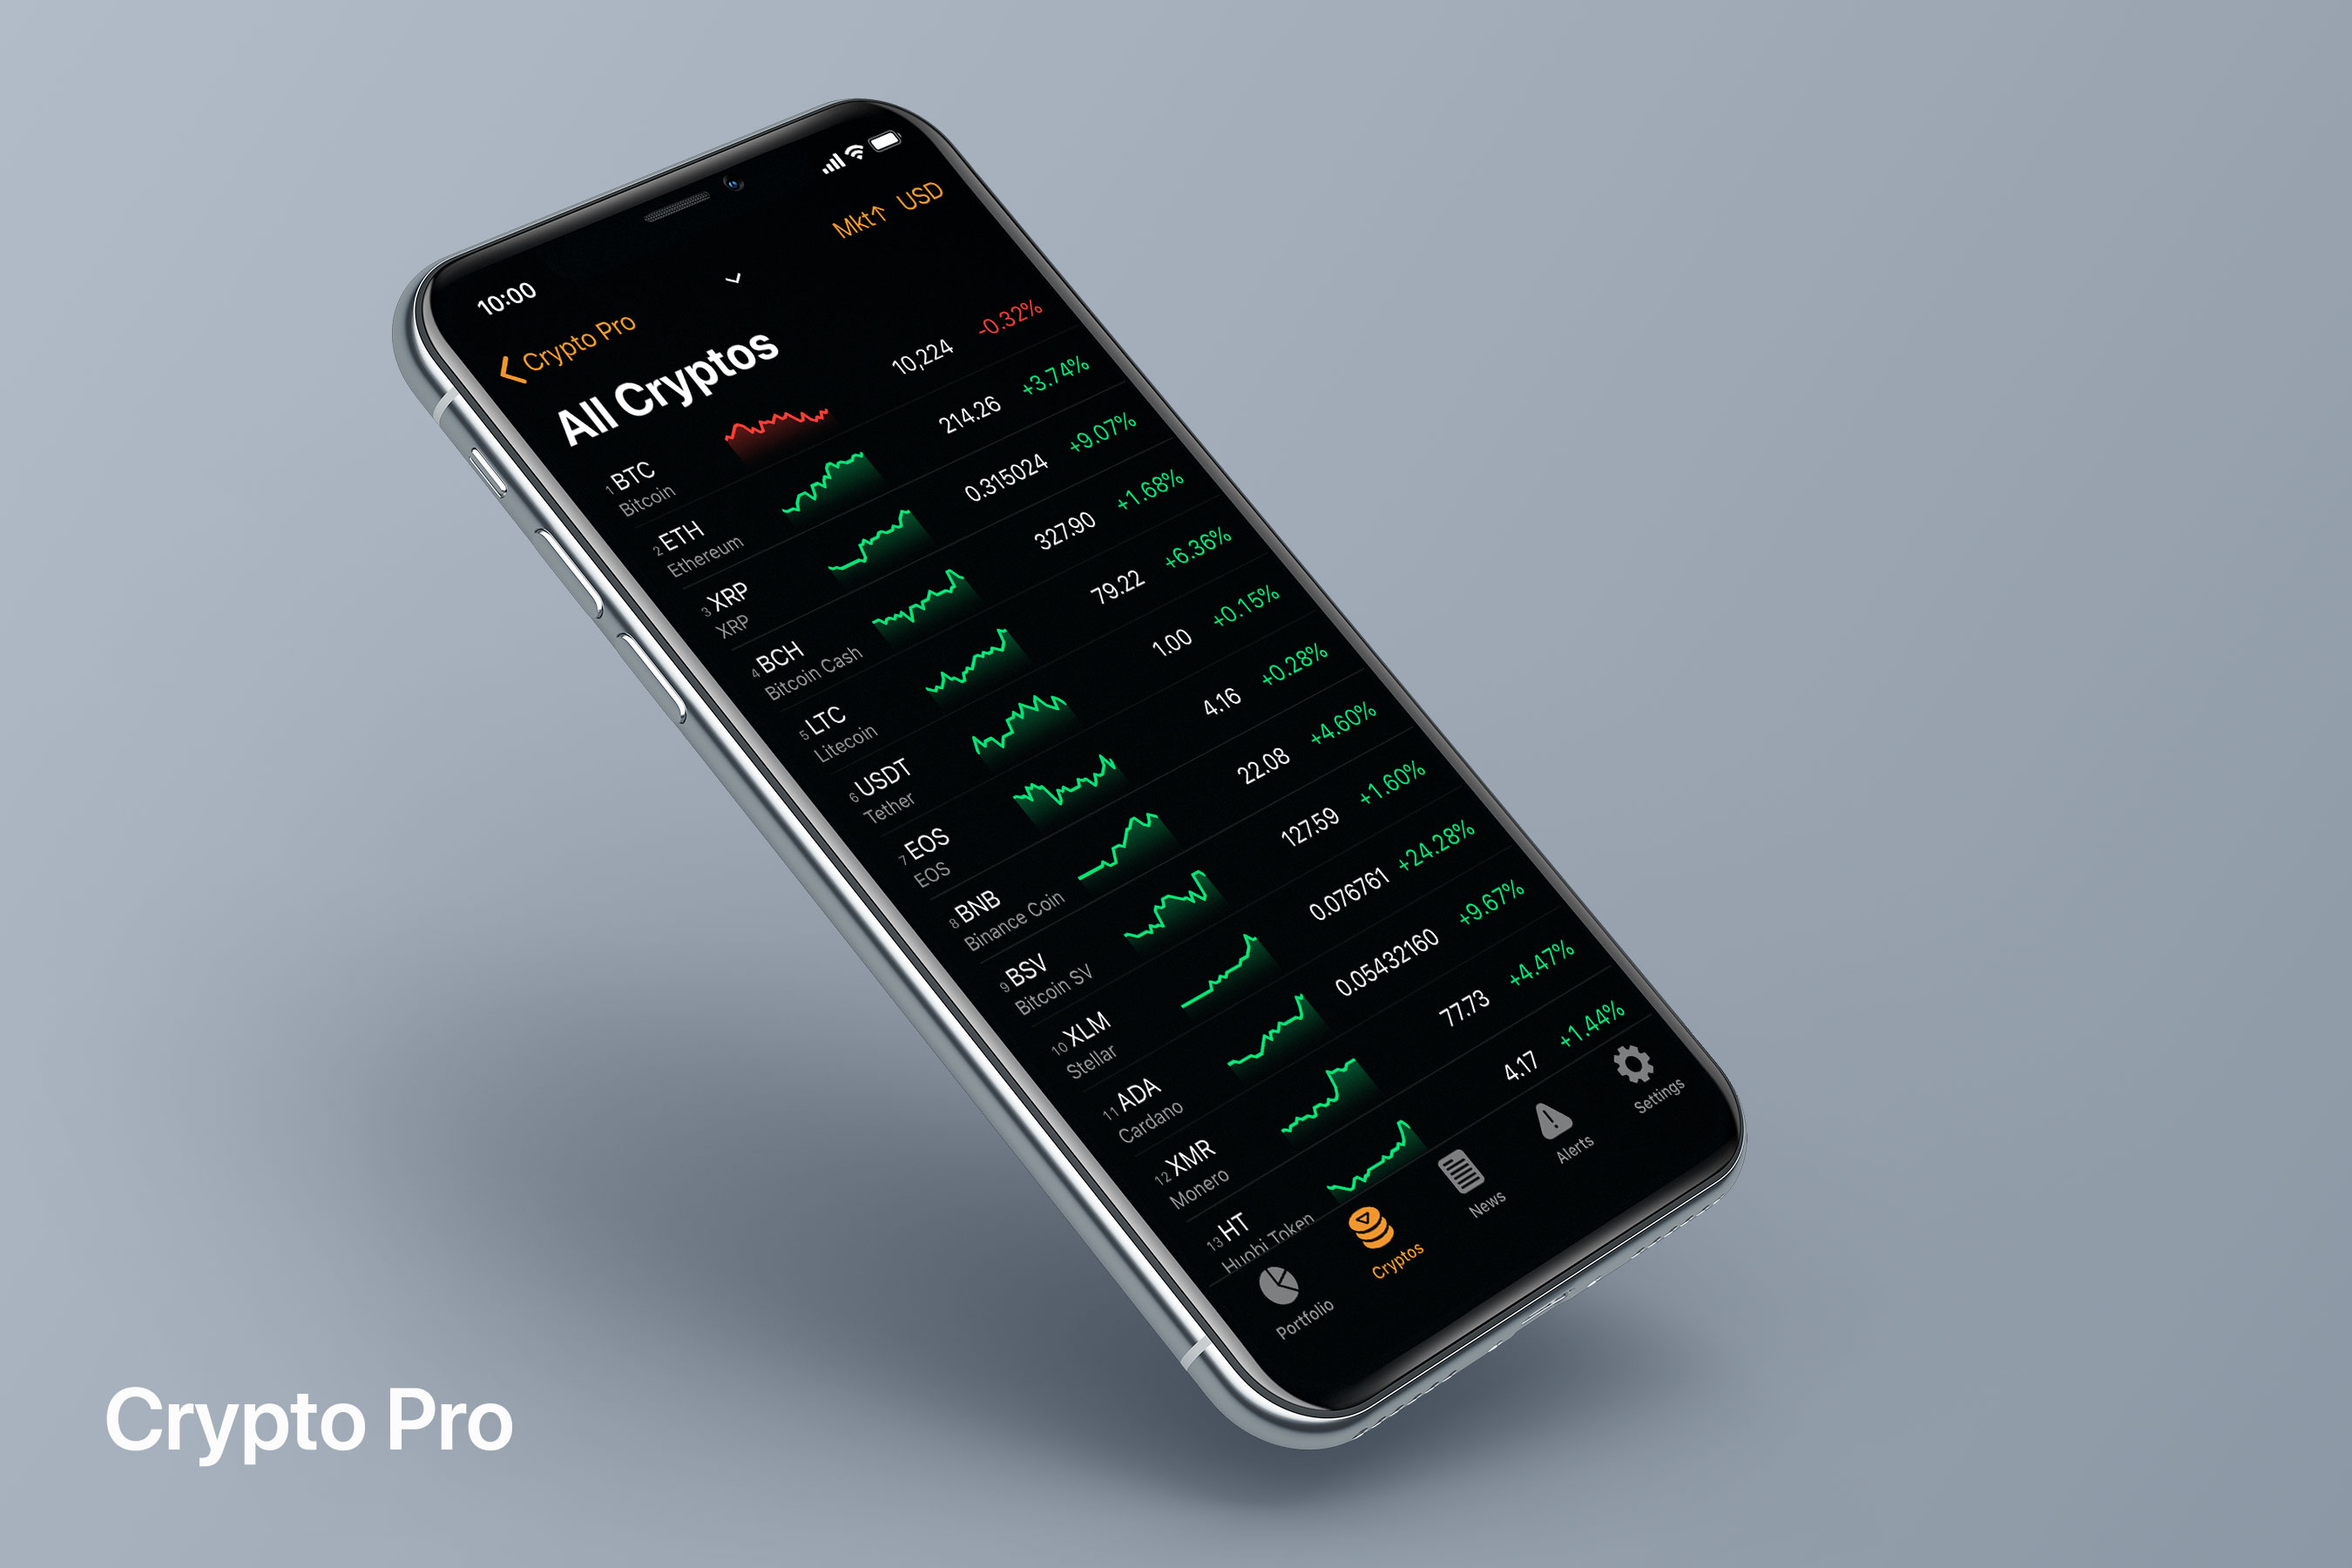 iPhone showing Crypto Pro app in dark mode